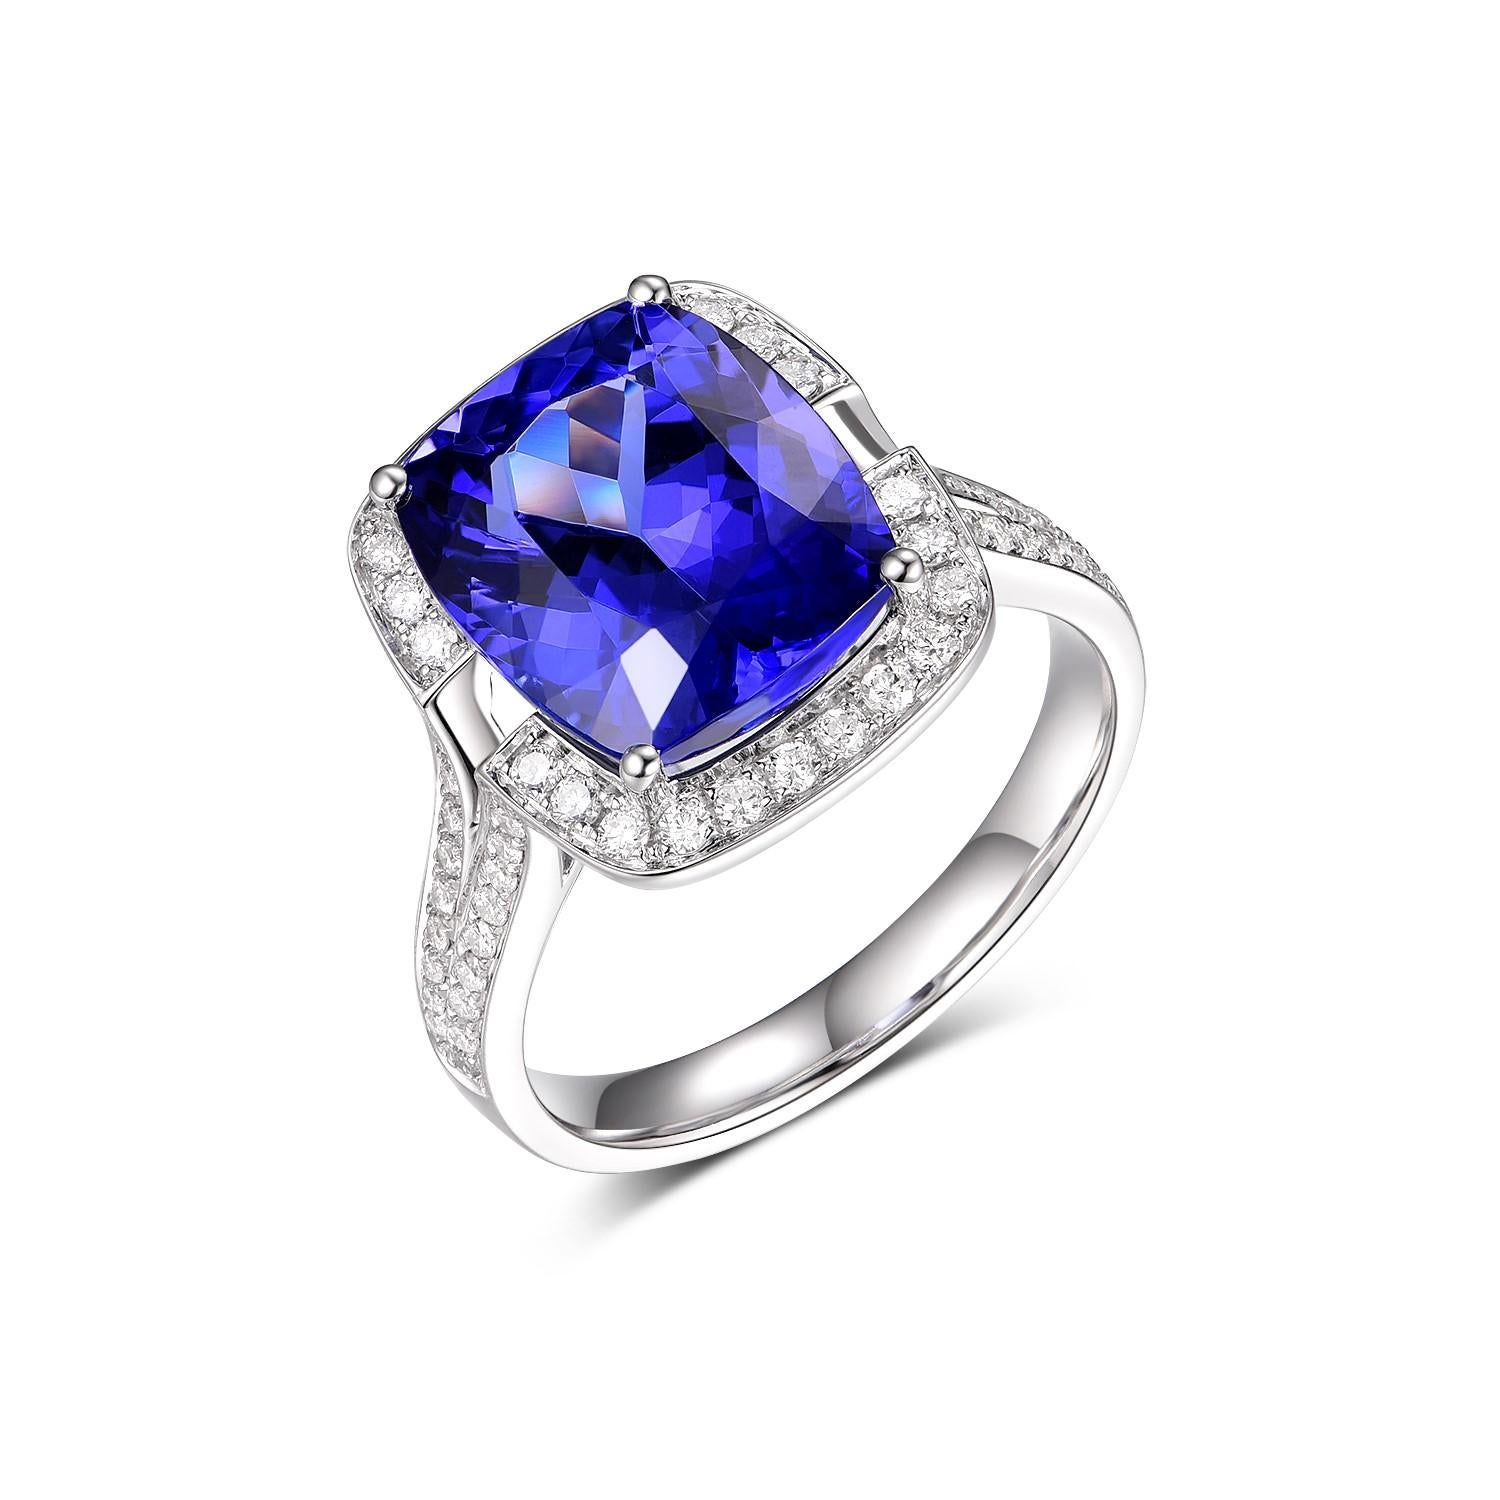 This exquisite ring features a mesmerizing 6.08-carat Tanzanite, known for its striking bluish-violet hue, set in the cool sheen of 18K white gold. The centerpiece gemstone is cut to maximize its deep, rich color and captivating brilliance, making